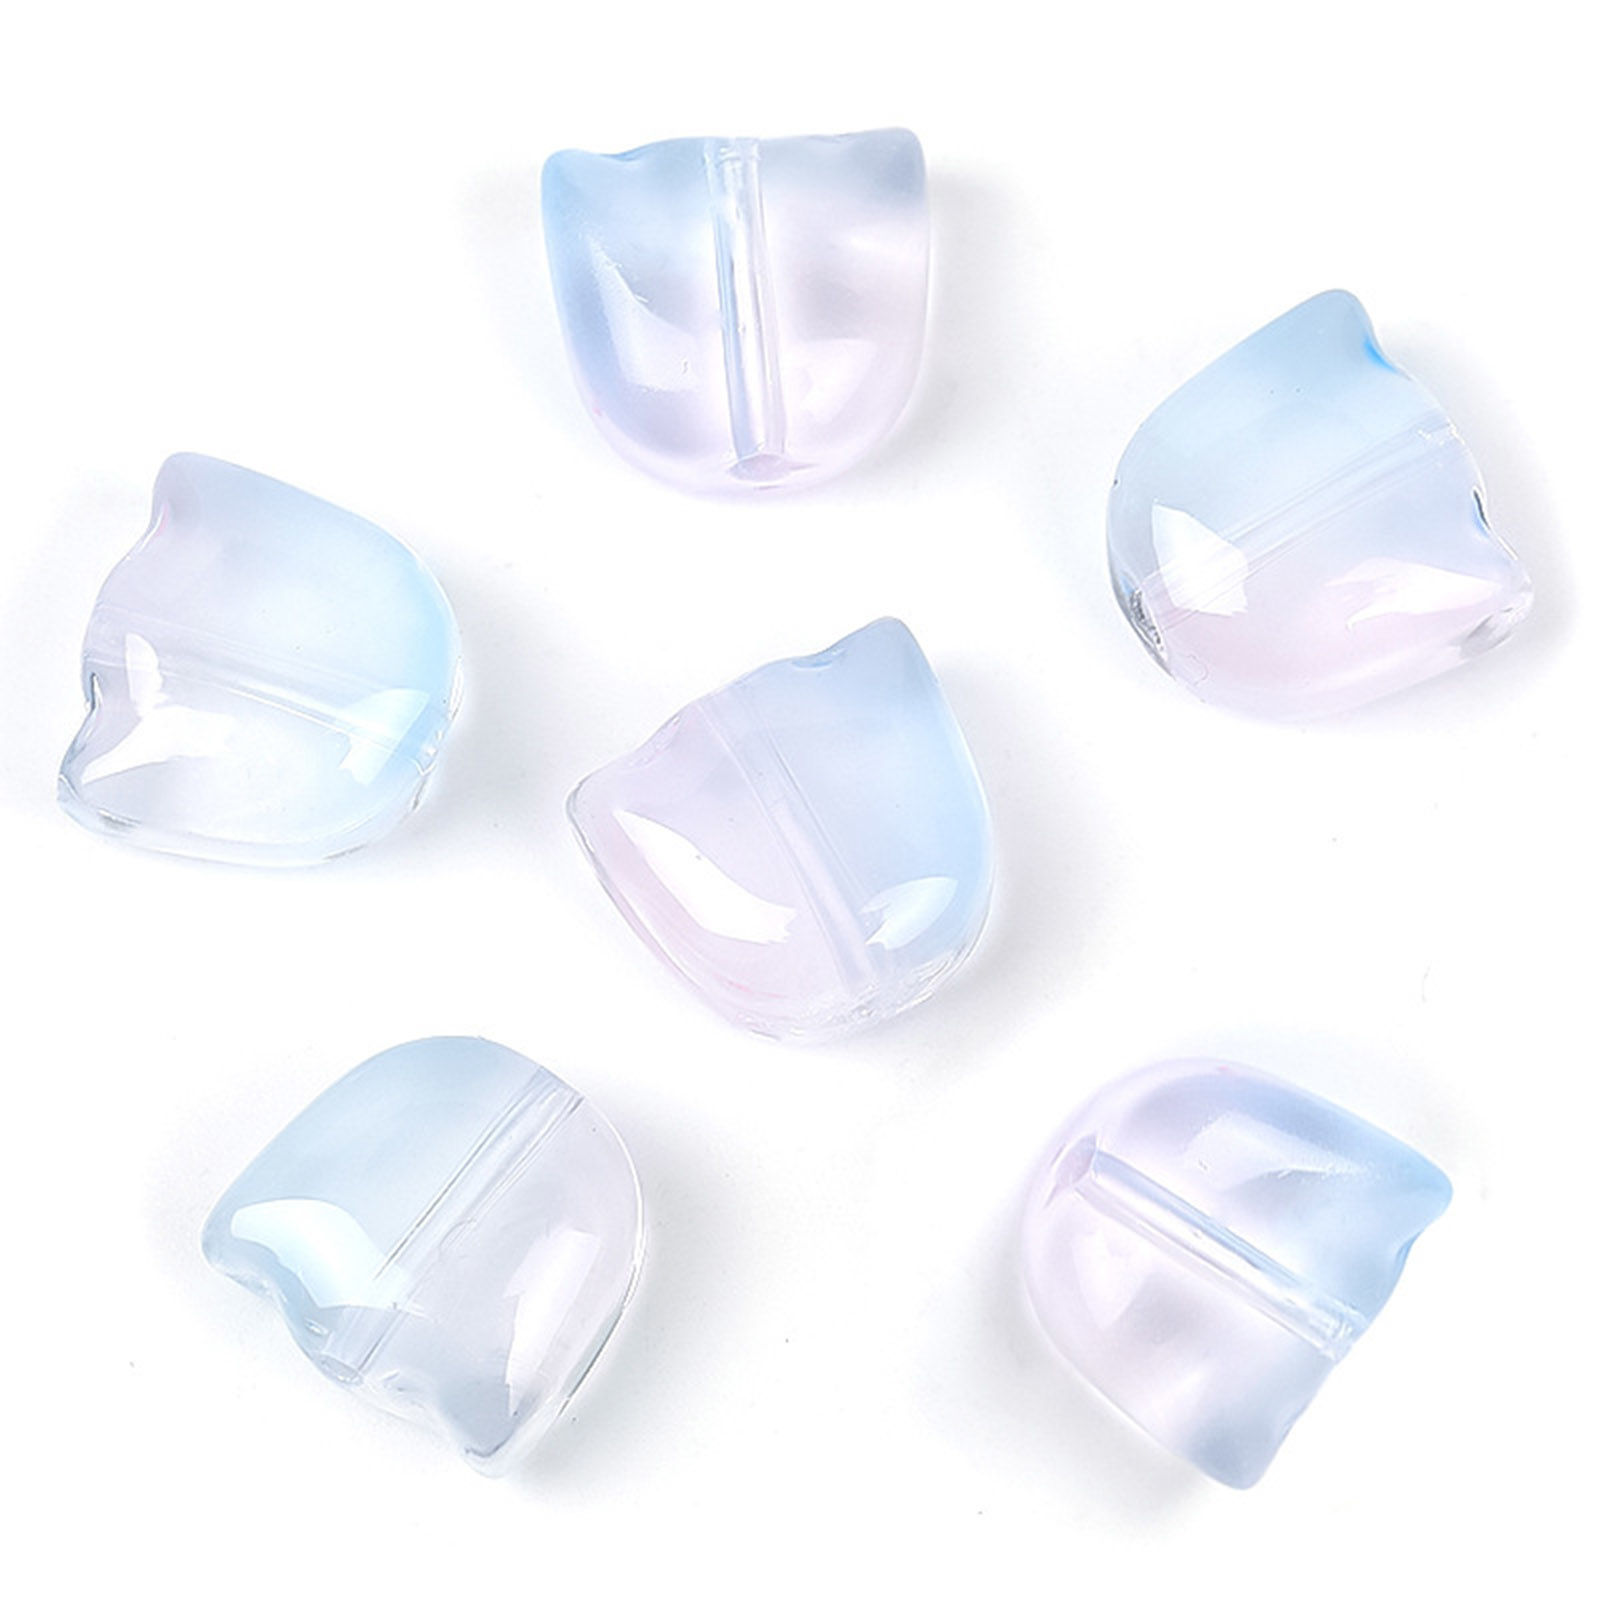 Picture of Lampwork Glass Beads Tulip Flower Light Blue & Light Pink Gradient Color About 9mm x 8.8mm, Hole: Approx 1.1mm, 20 PCs